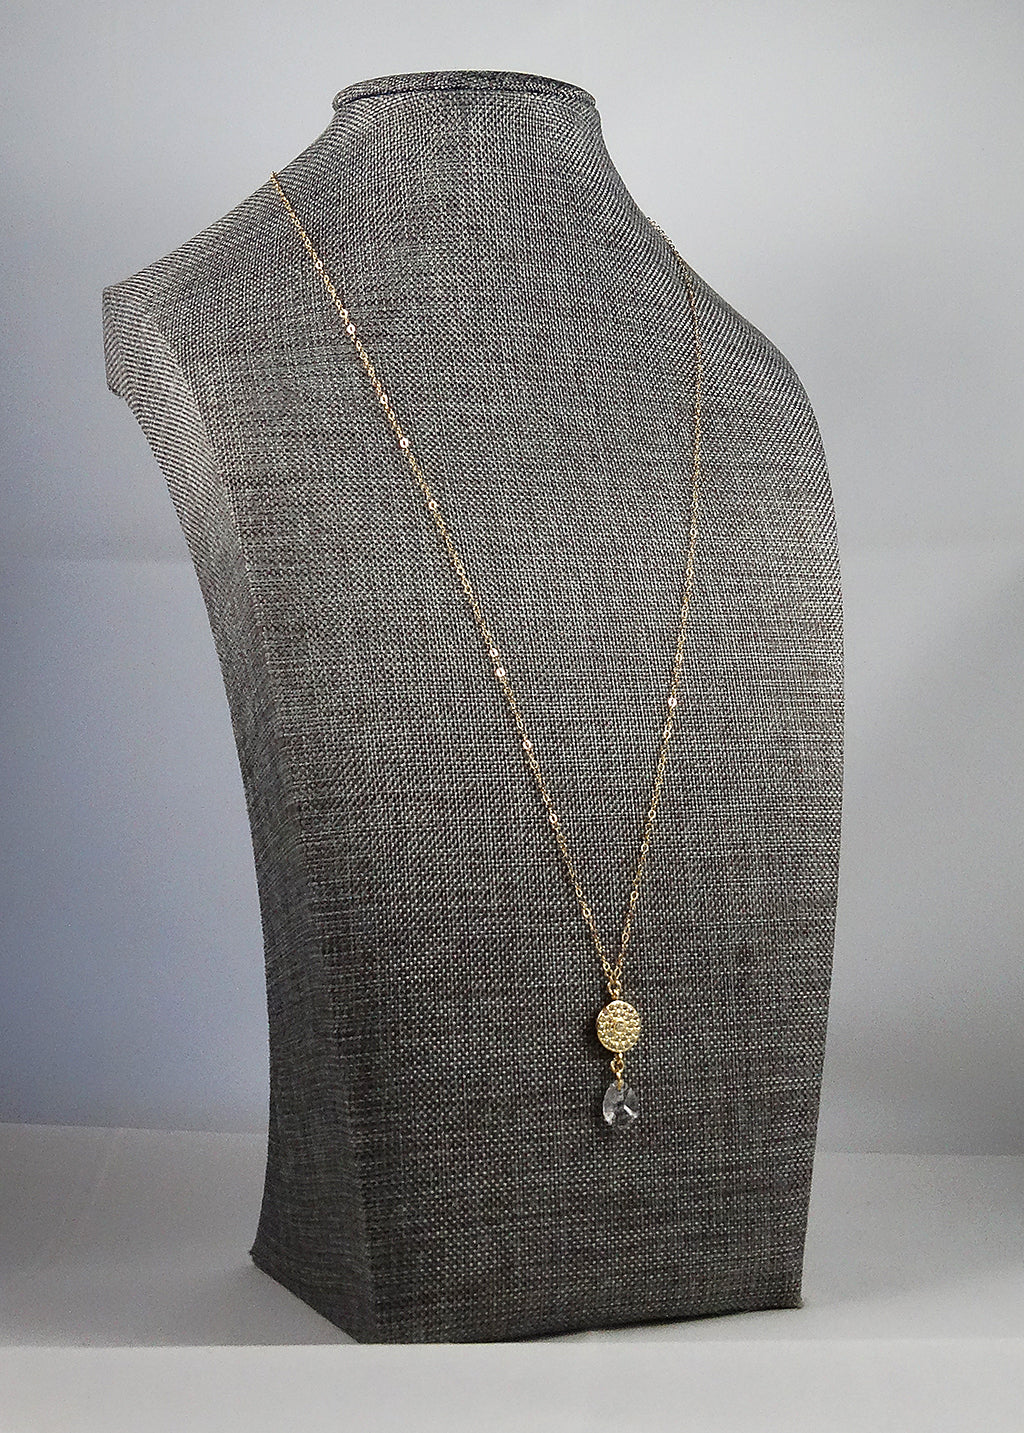 Pendant Necklace in Gold